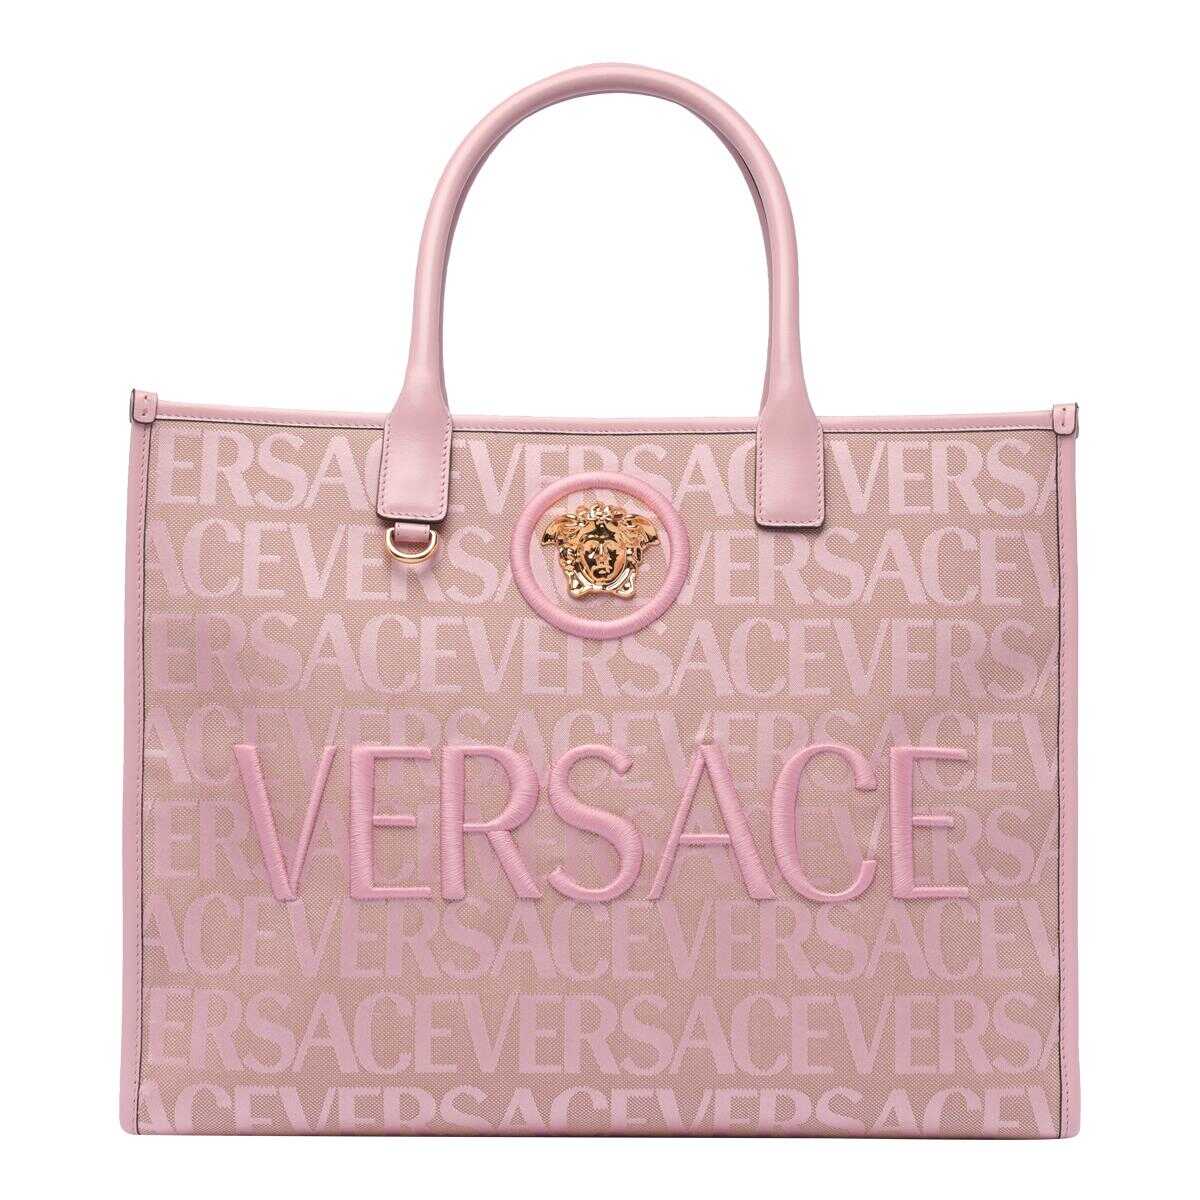 Versace VERSACE PINK CANVAS AND LEATHER ALLOVER TOTE BAG Pink